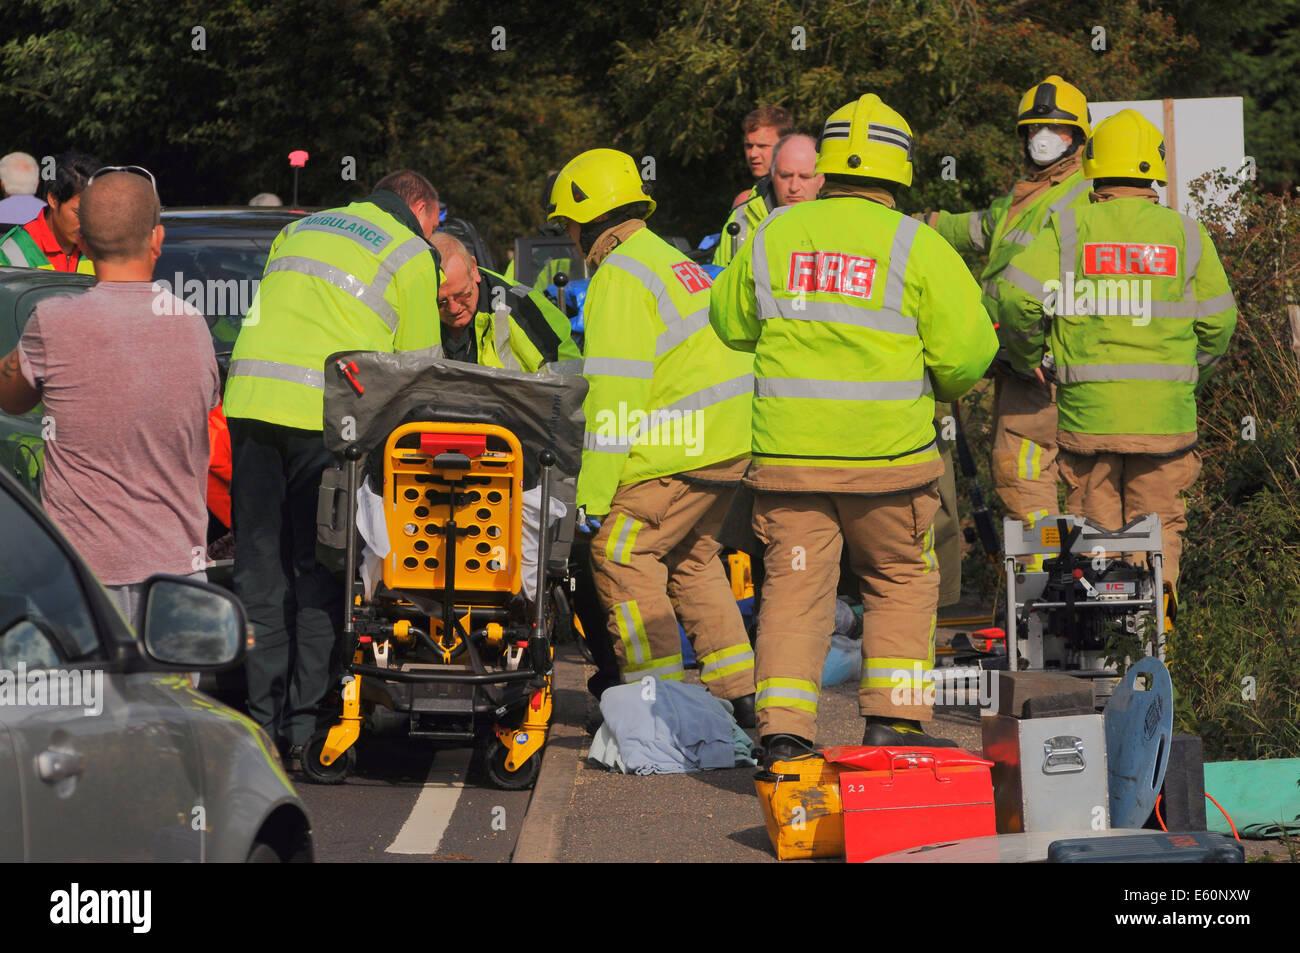 Bexhill, East Sussex, UK.10th August 2014. Emergency Services in action after a Road Traffic accident on the A259 , Barnhorn Road, West of Little Common. A lady was taken from the scene by road ambulance Police advised her injuries were not serious, helicopter evacuation was not required by Kent HEMS which was quickly on site. Locals at the scene advise that this is a regular accident Black spot.. David Burr/Alamy Live News Stock Photo